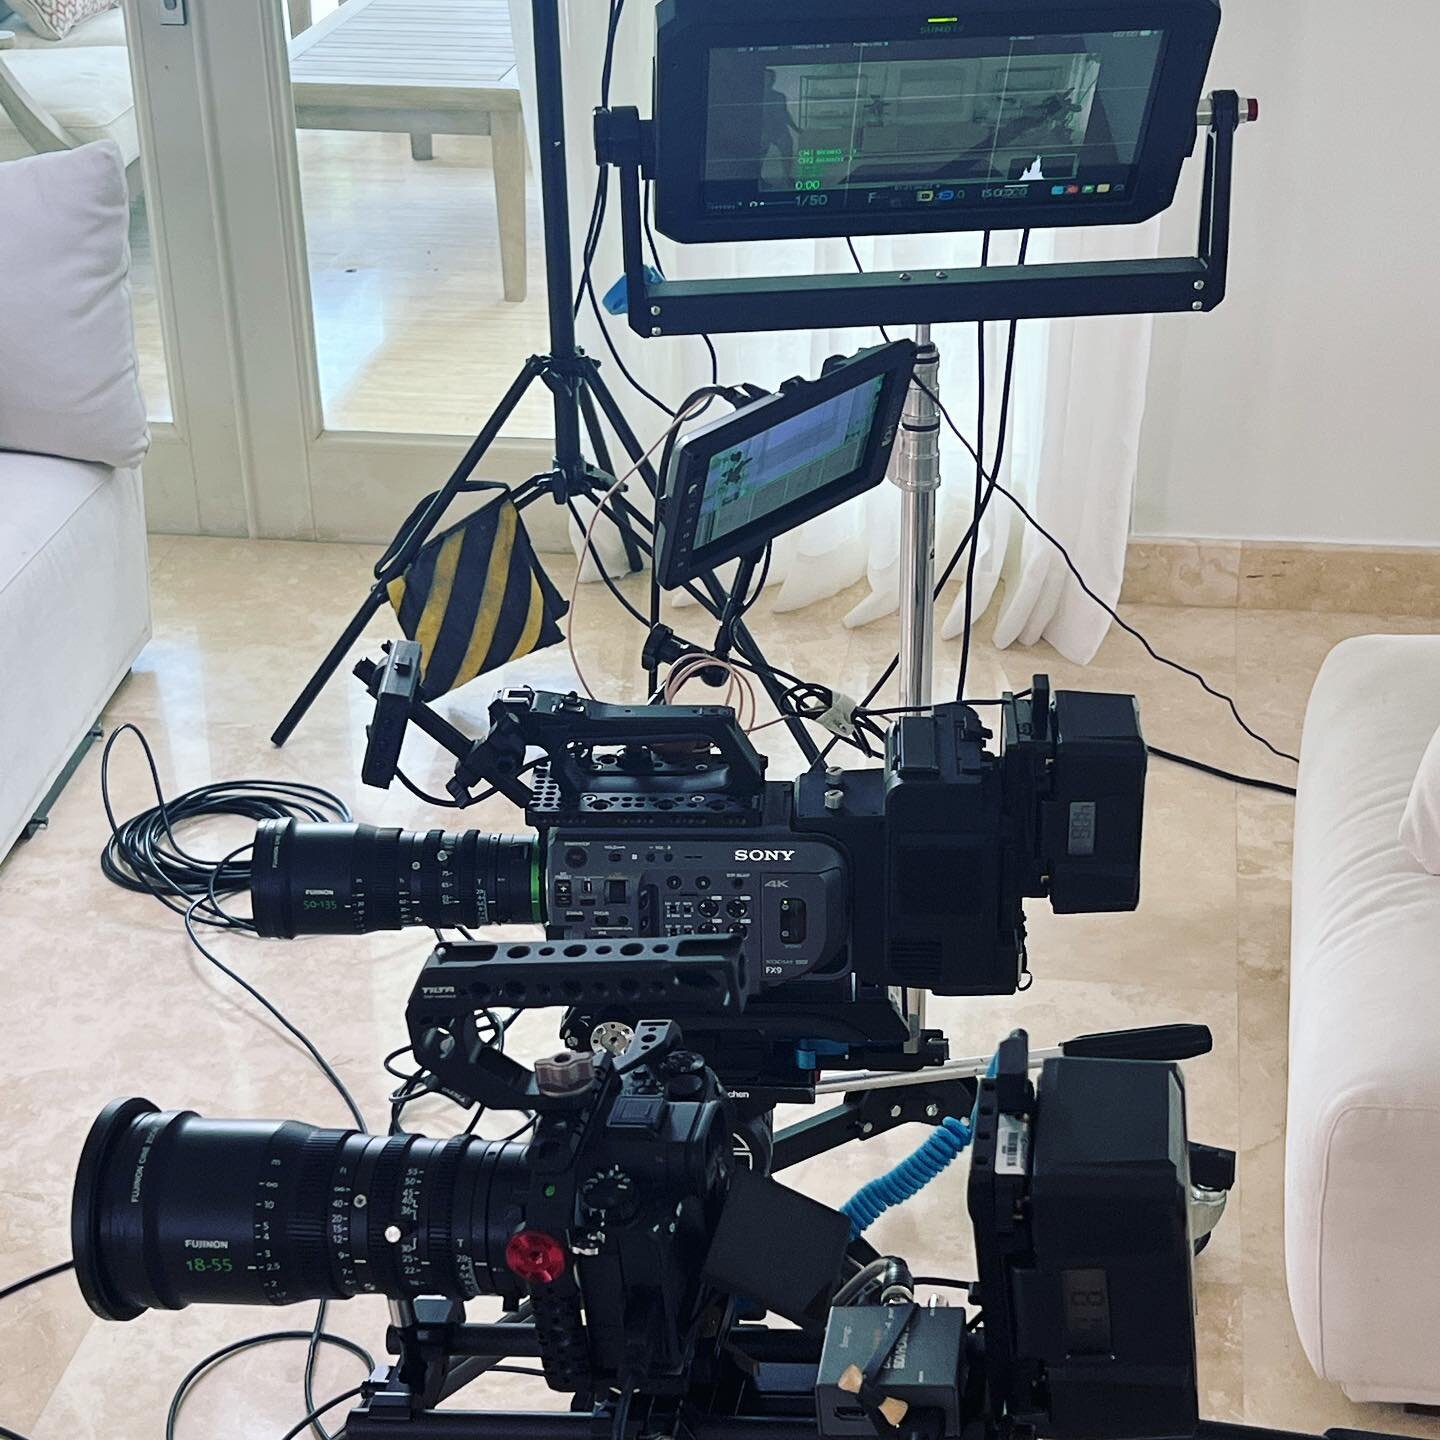 At work with the twins 

#production #sony #fujinon #FX9 #A1 #atomossumo #godox #aputure300x #cereprods #puertorico #videoproduction